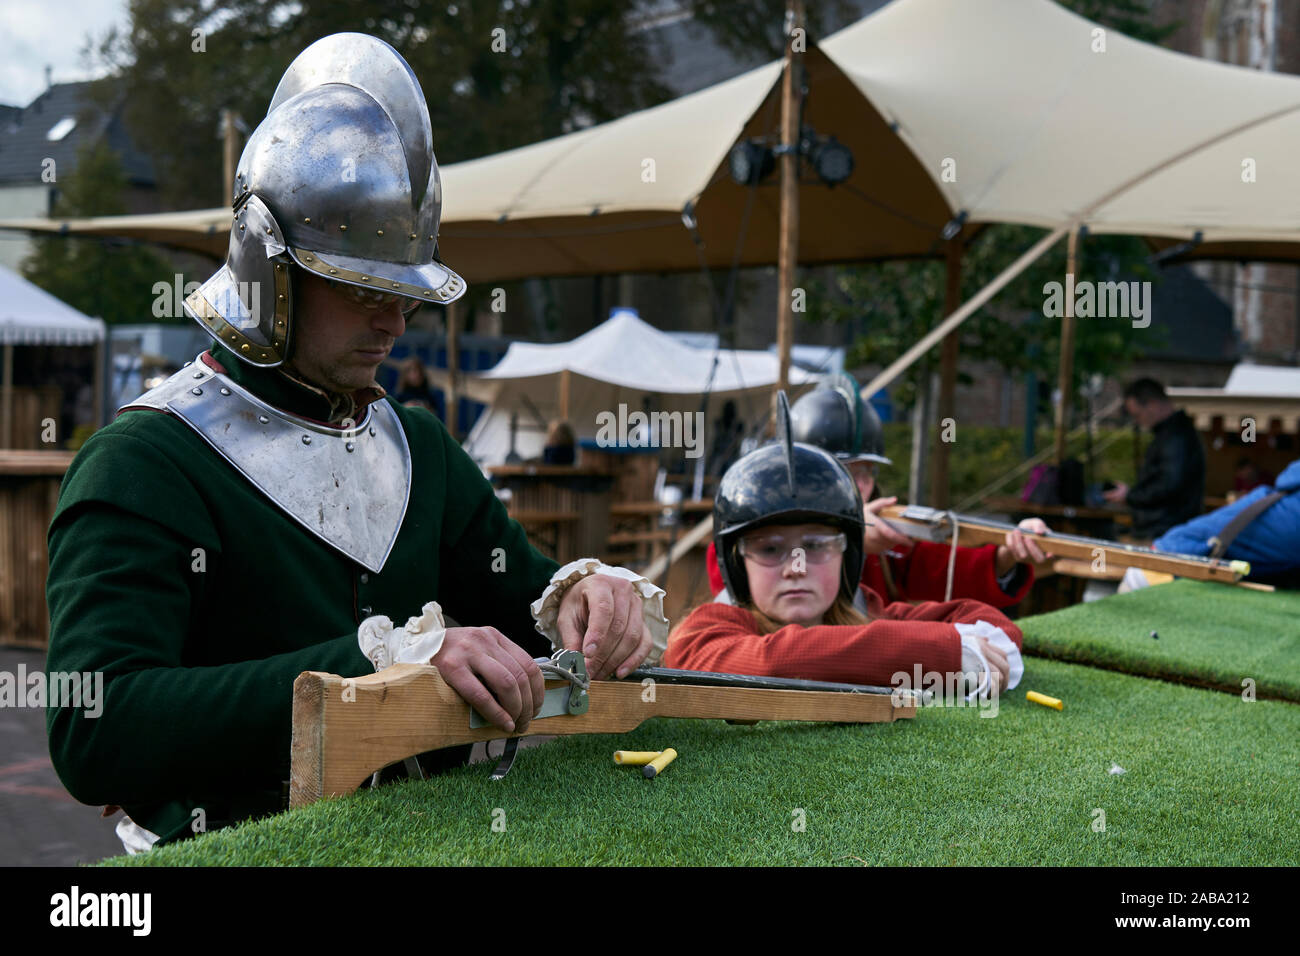 A participant dressed as a soldier teaches children how to use a toy musket. Stock Photo